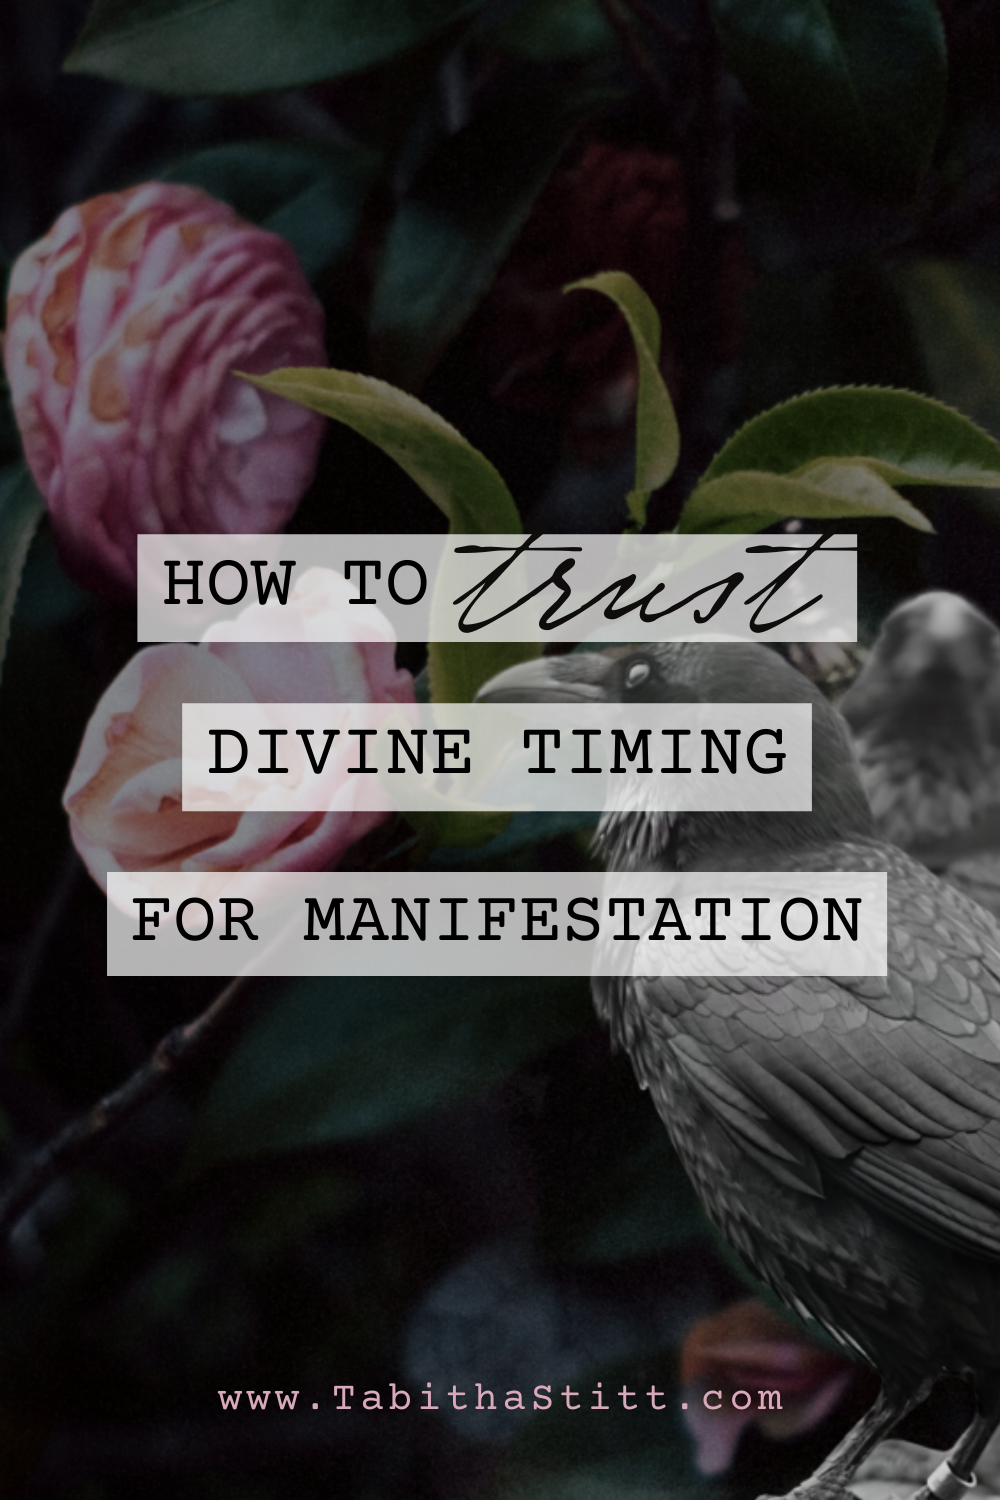 How to Trust Divine Timing for Manifestation with Image of Crow as a symbol for freedom and flight